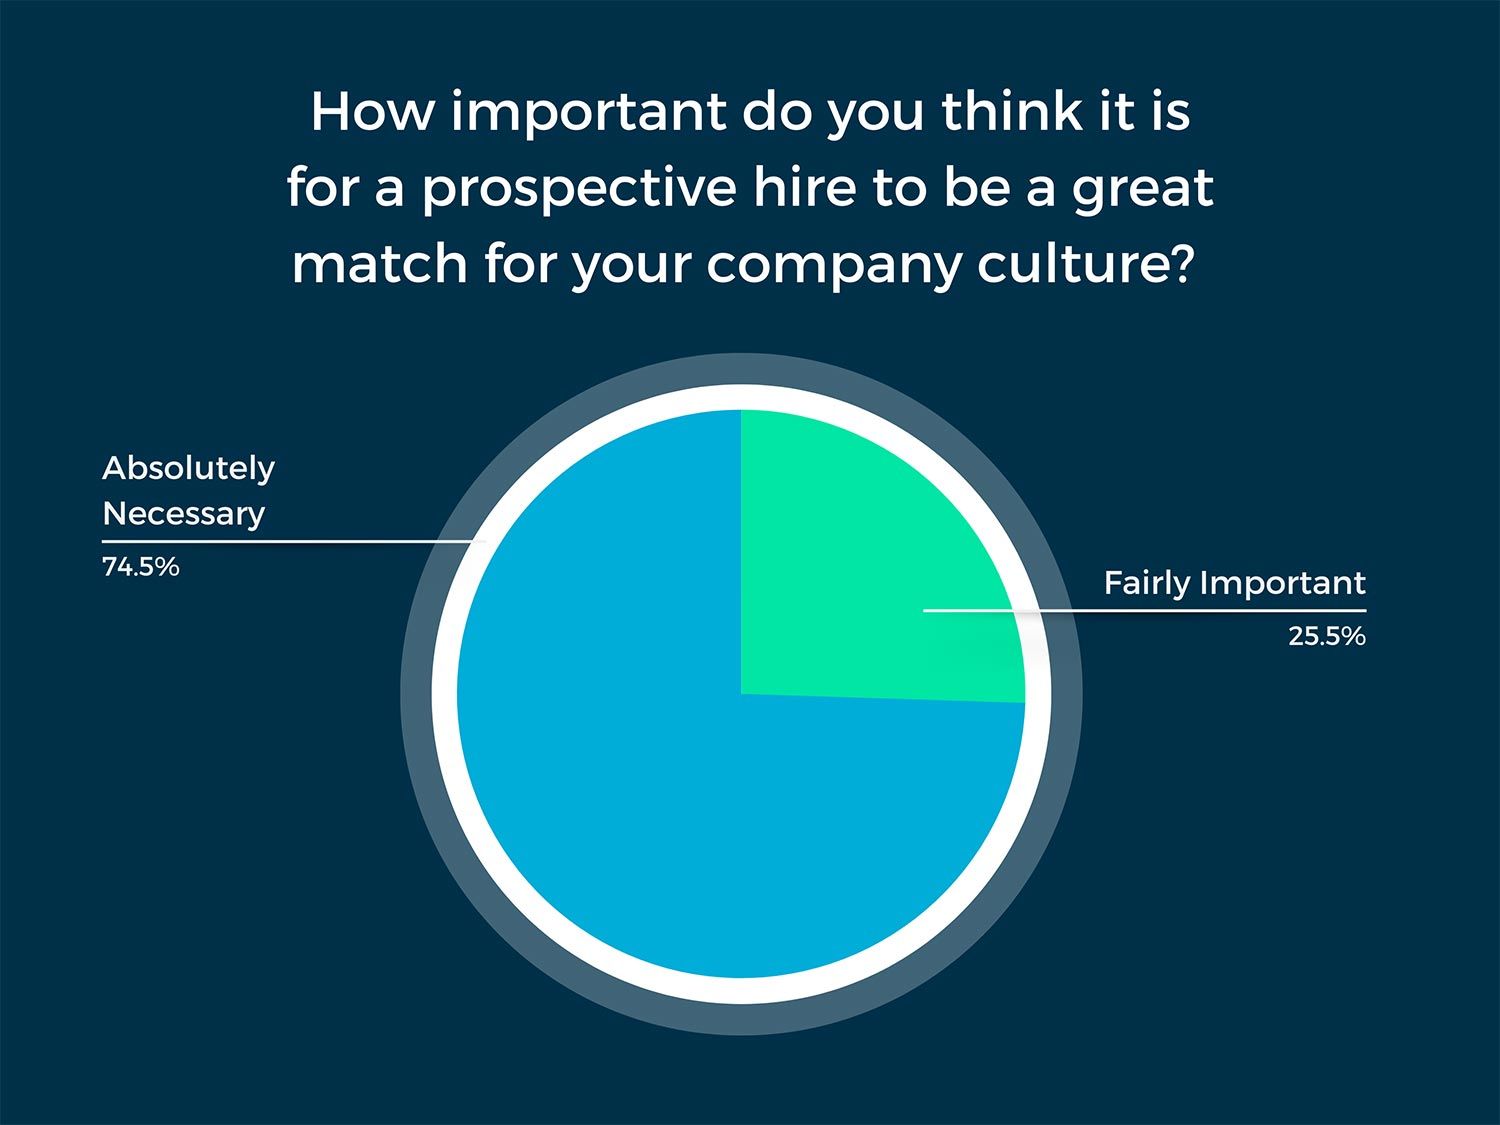 How important do you think it is for a prospective hire to be a great match for your company culture? 